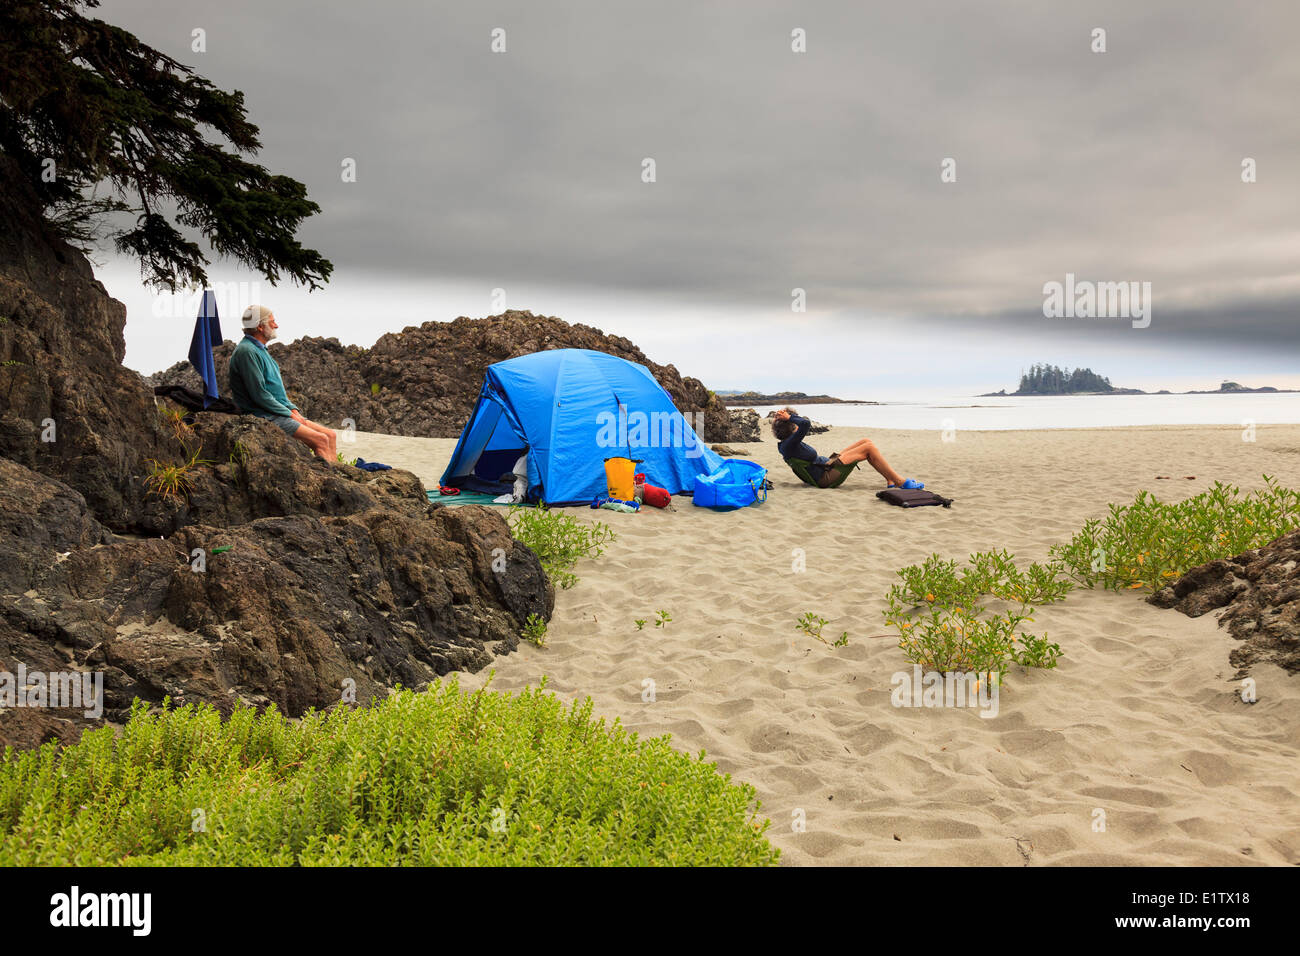 Two kayakers relax at their campsite on Whaler Islet off the British Columbia coast, Canada. Model Released Stock Photo